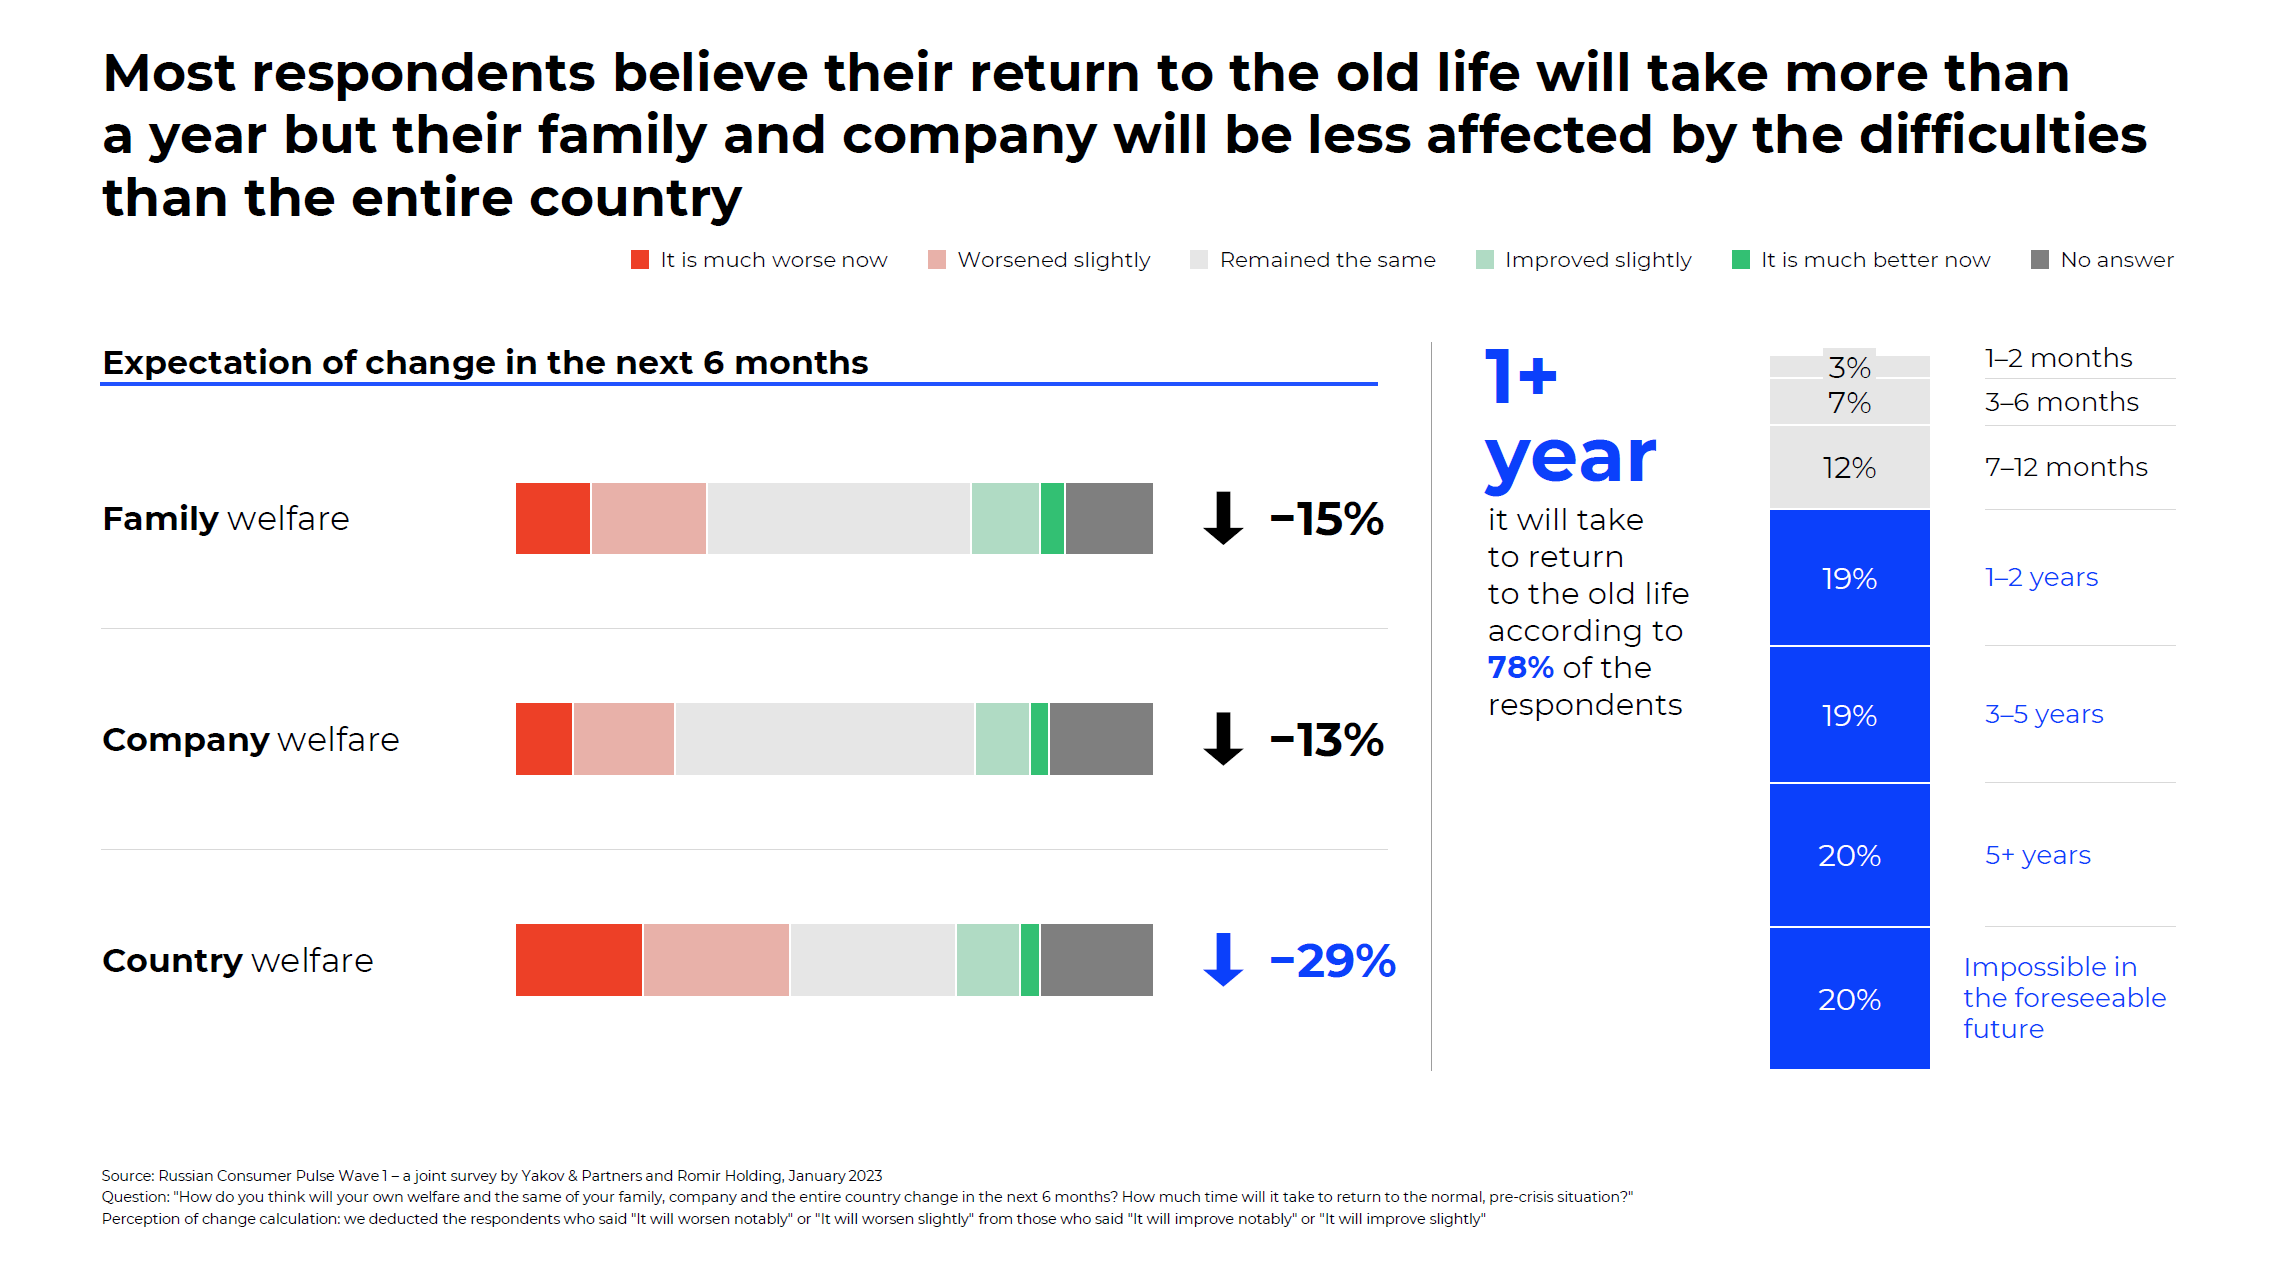 Most respondents believe their return to the old life will take more than a year but their family and company will be less affected by the difficulties than the entire country